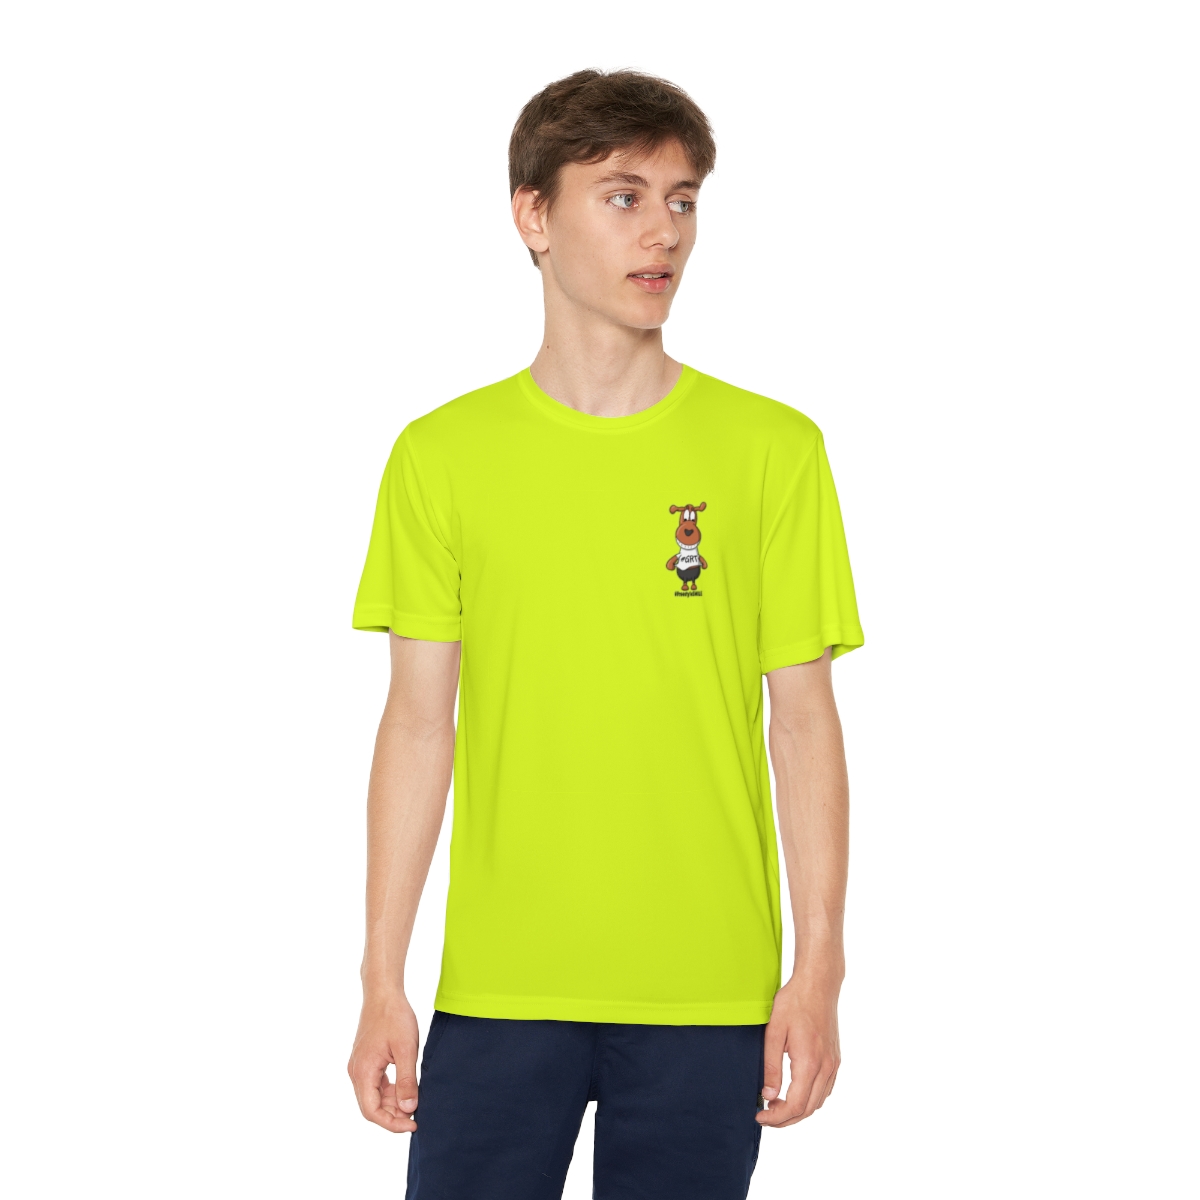 Youth LIVING LIFE FREESTYLE FREDDY Tee product main image